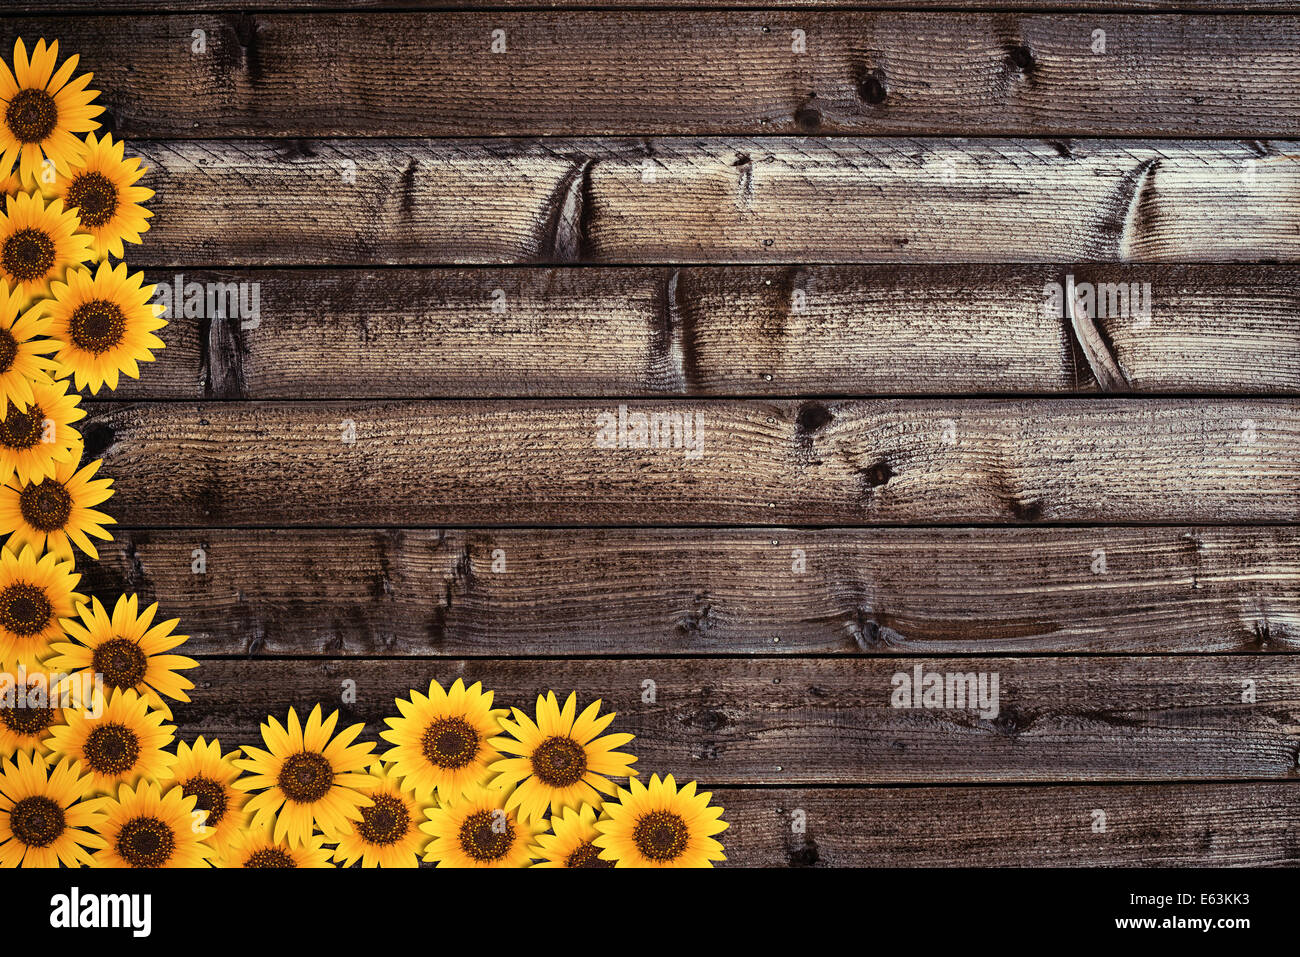 Wooden plank background with sunflowers border Stock Photo